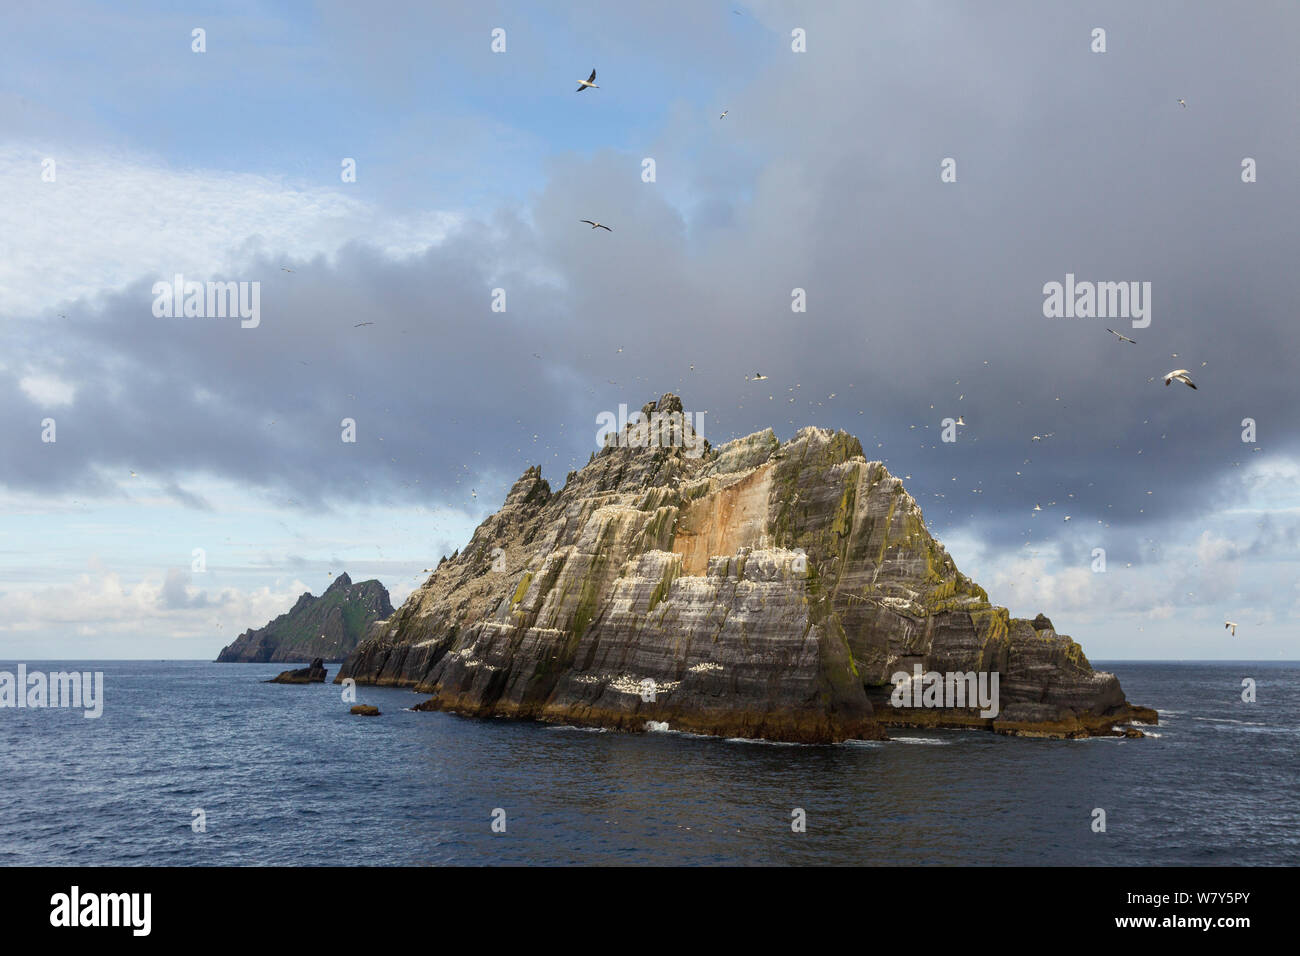 Northern gannet (Morus bassanus) breeding colony on the Old Red Sandstone cliffs, with birds wheeling through the air. Skellig Michael in the distance to the left, Little Skellig in the foreground, County Kerry, Ireland. July. Stock Photo